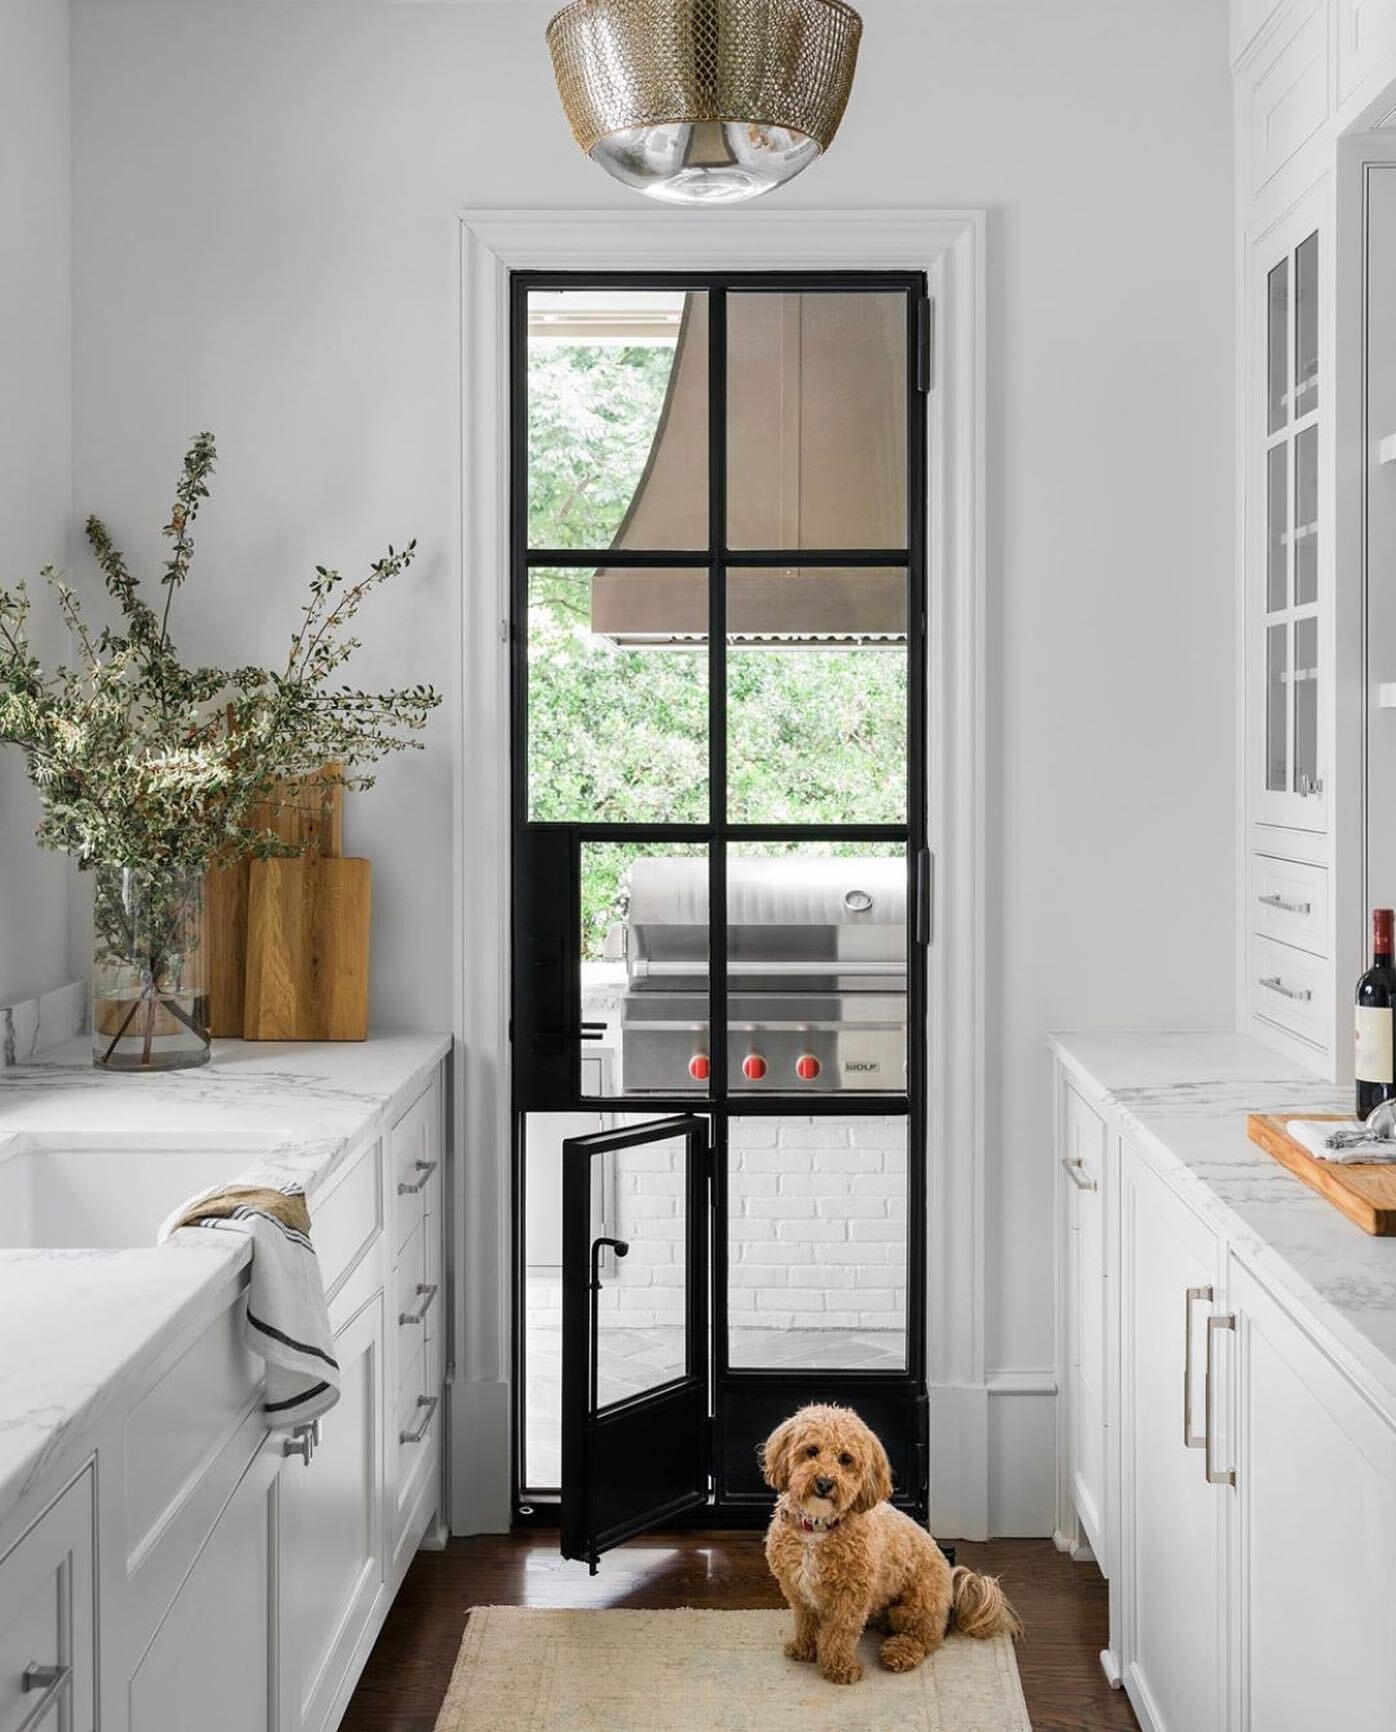 Your pups deserve the best, and man, this iron door is the best!  Look at that creatively integrated doggy door. 
.
.
Repost from @rusticwhiteinteriors Tagging @ladisicfinehomes @lmarchitect @sherryhdesigns @studioentourage